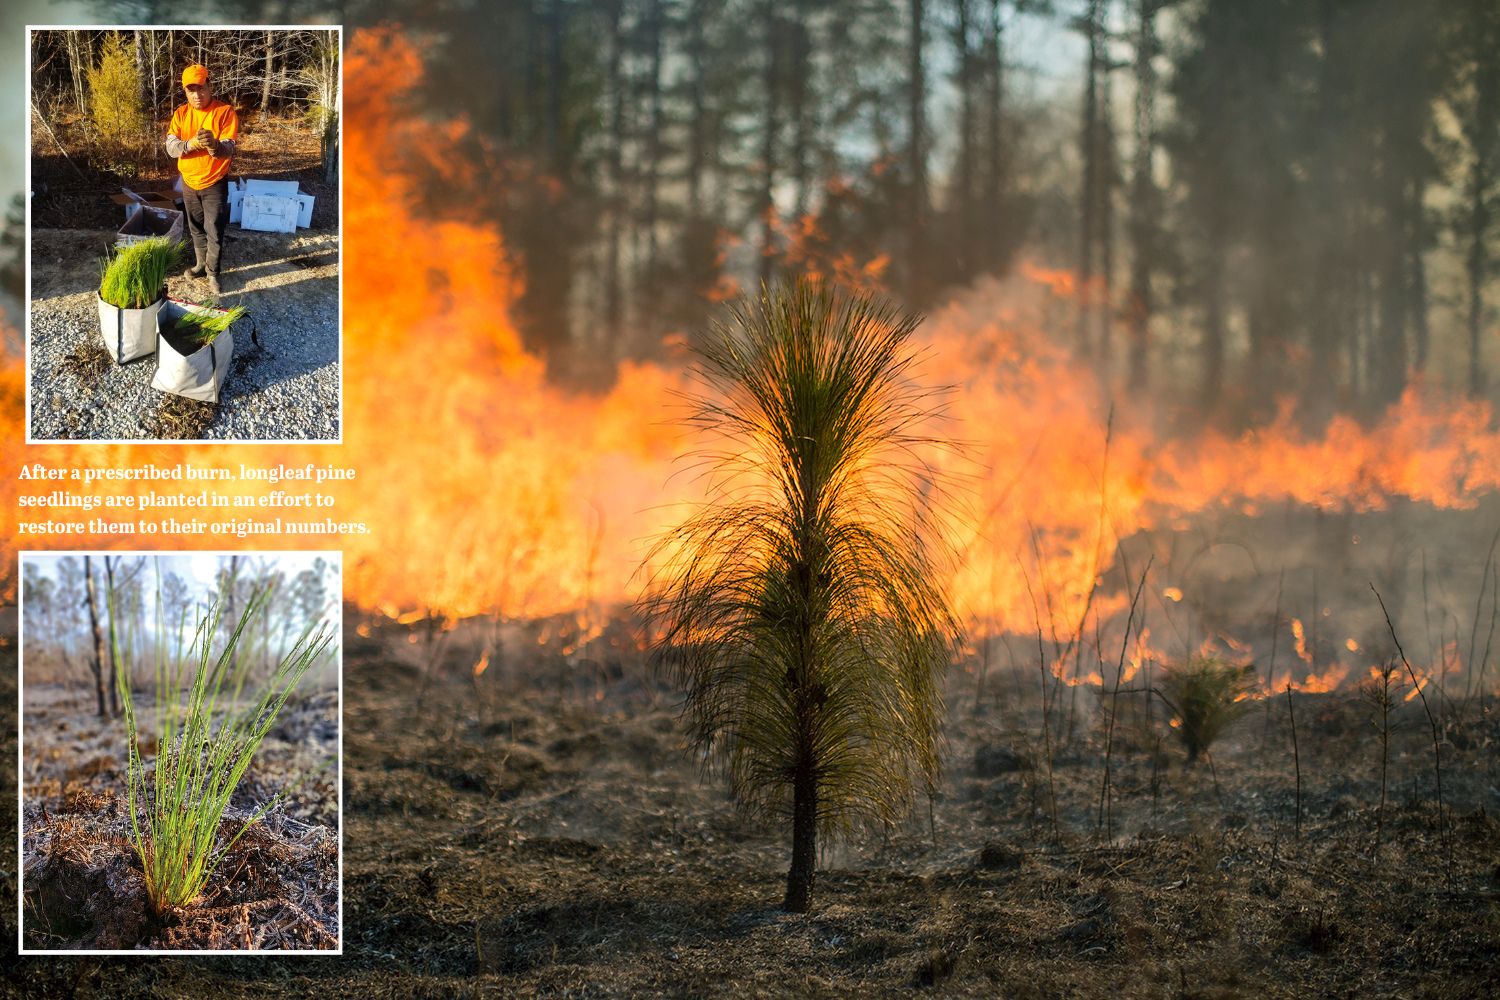 After a prescribed burn the loblolly pines could be planted so a pine savannah could be established